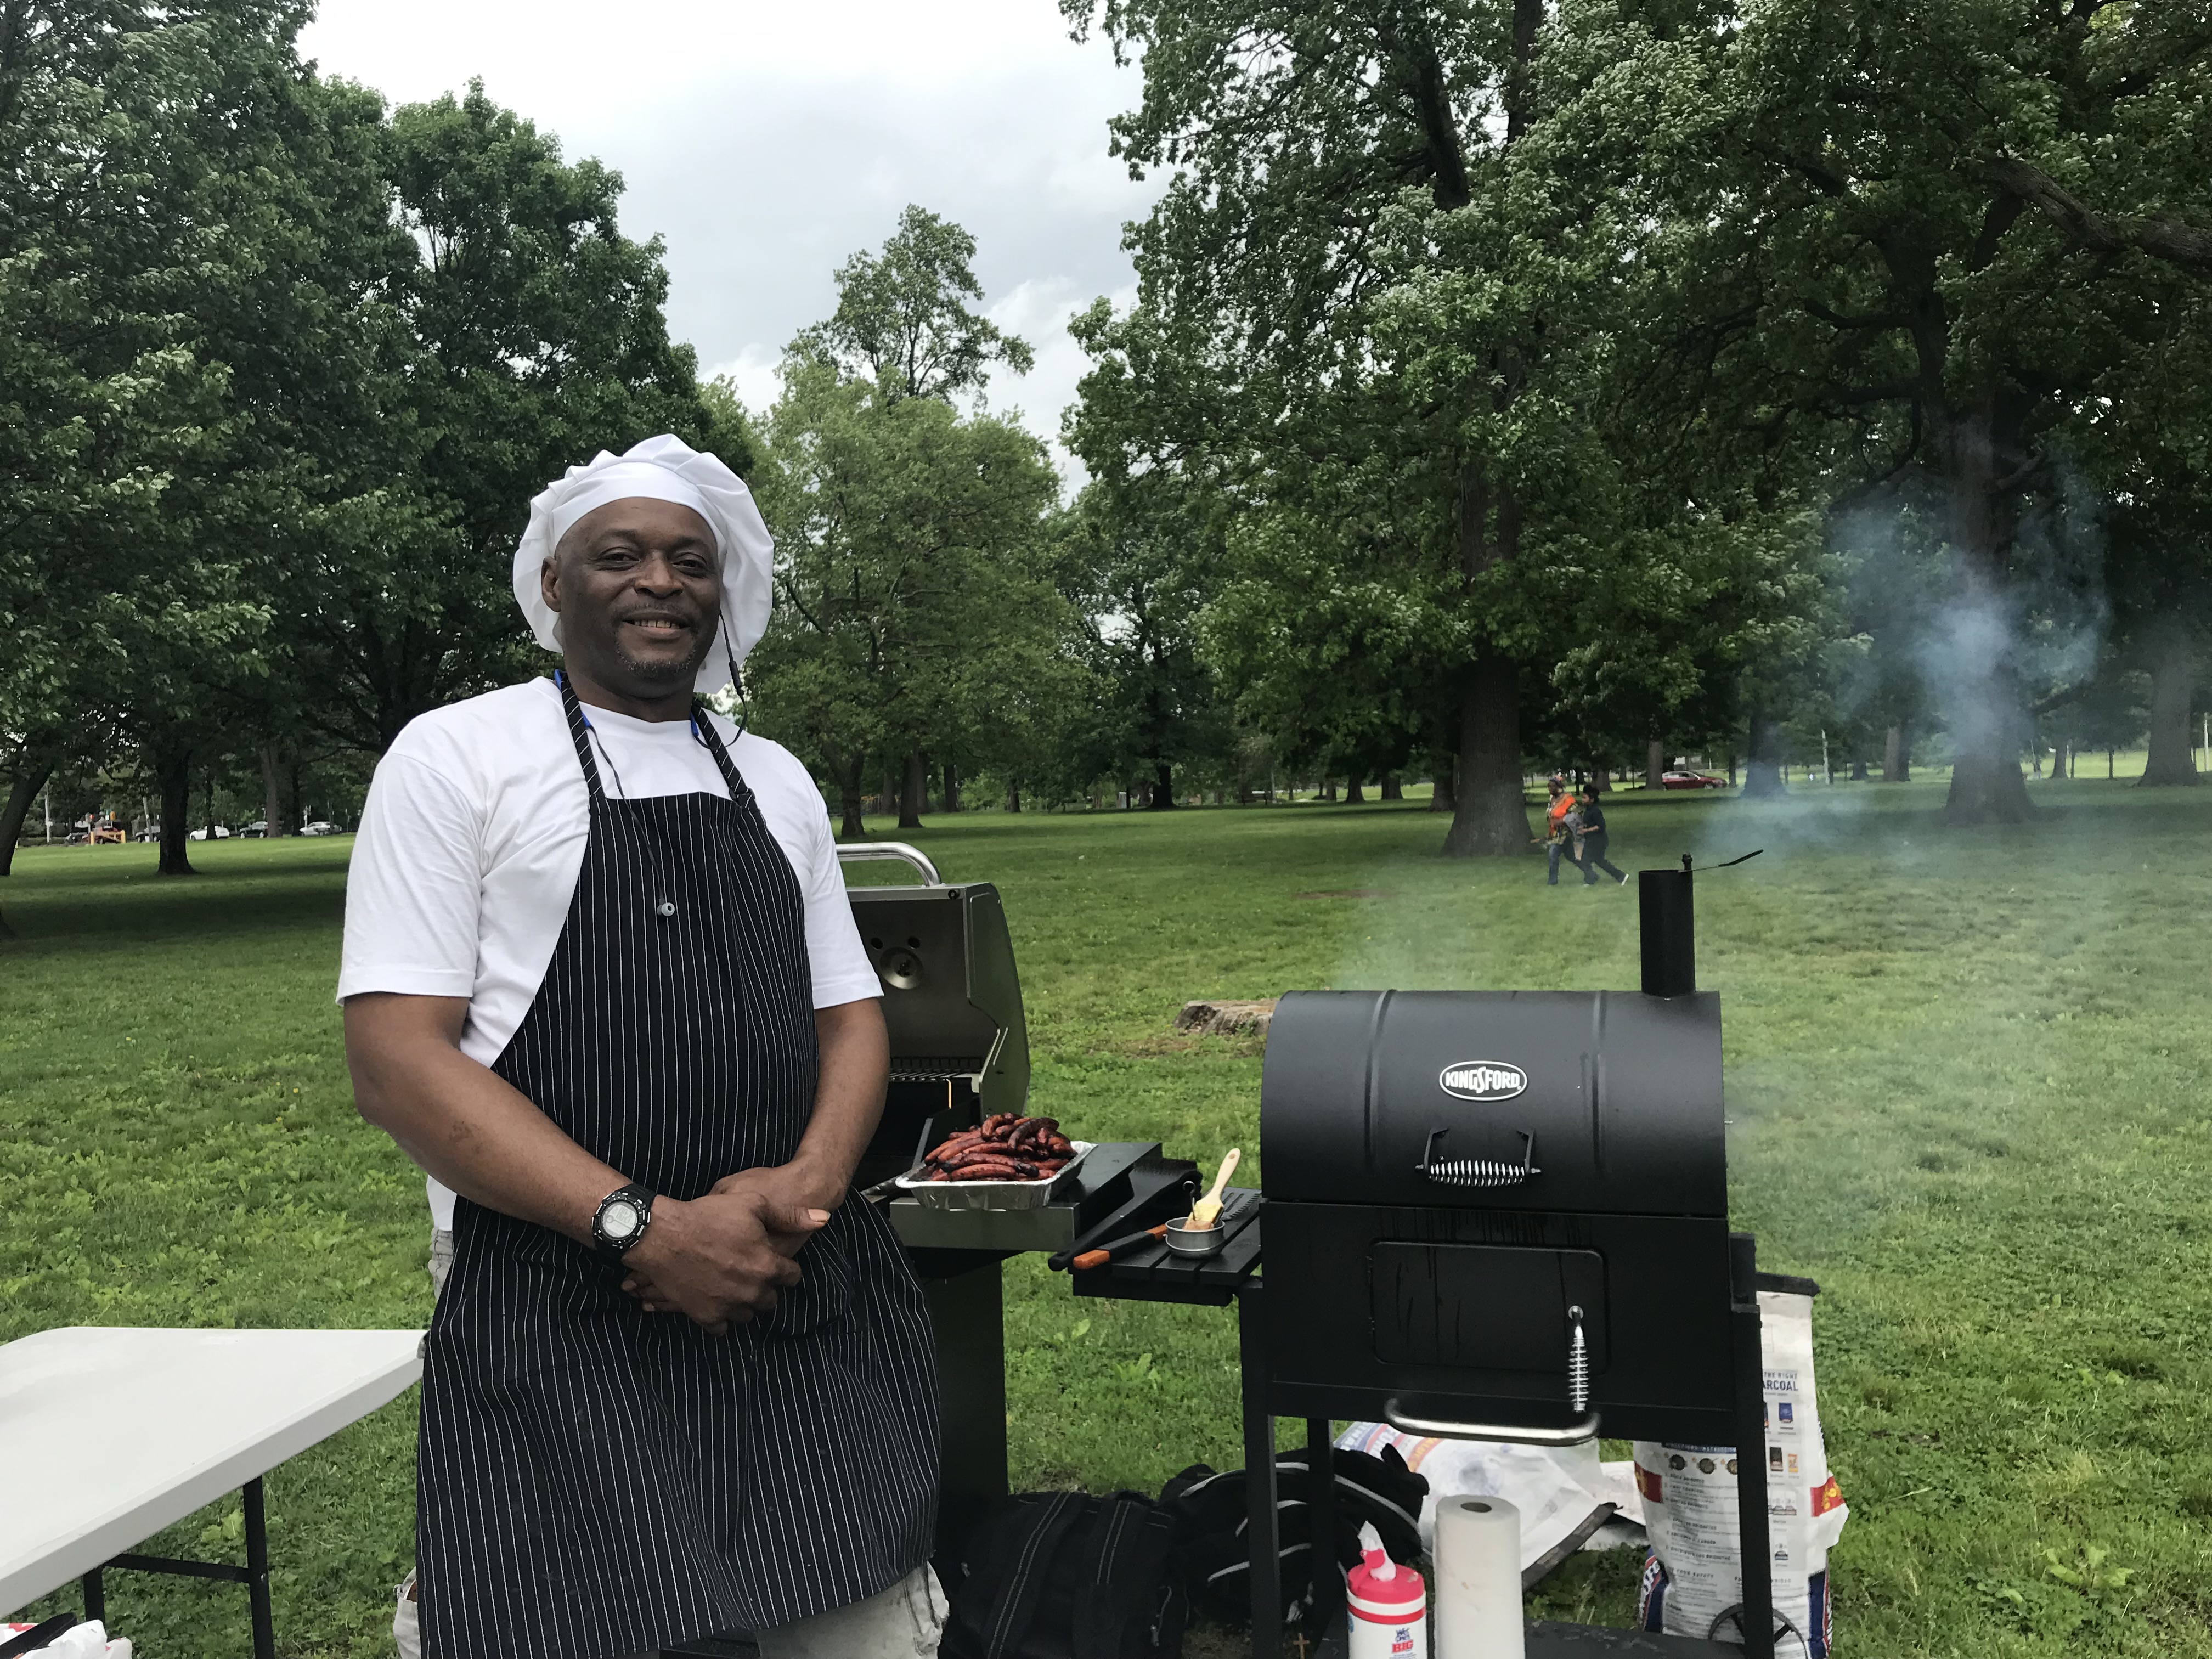 anthony at the cookout with grills behind him